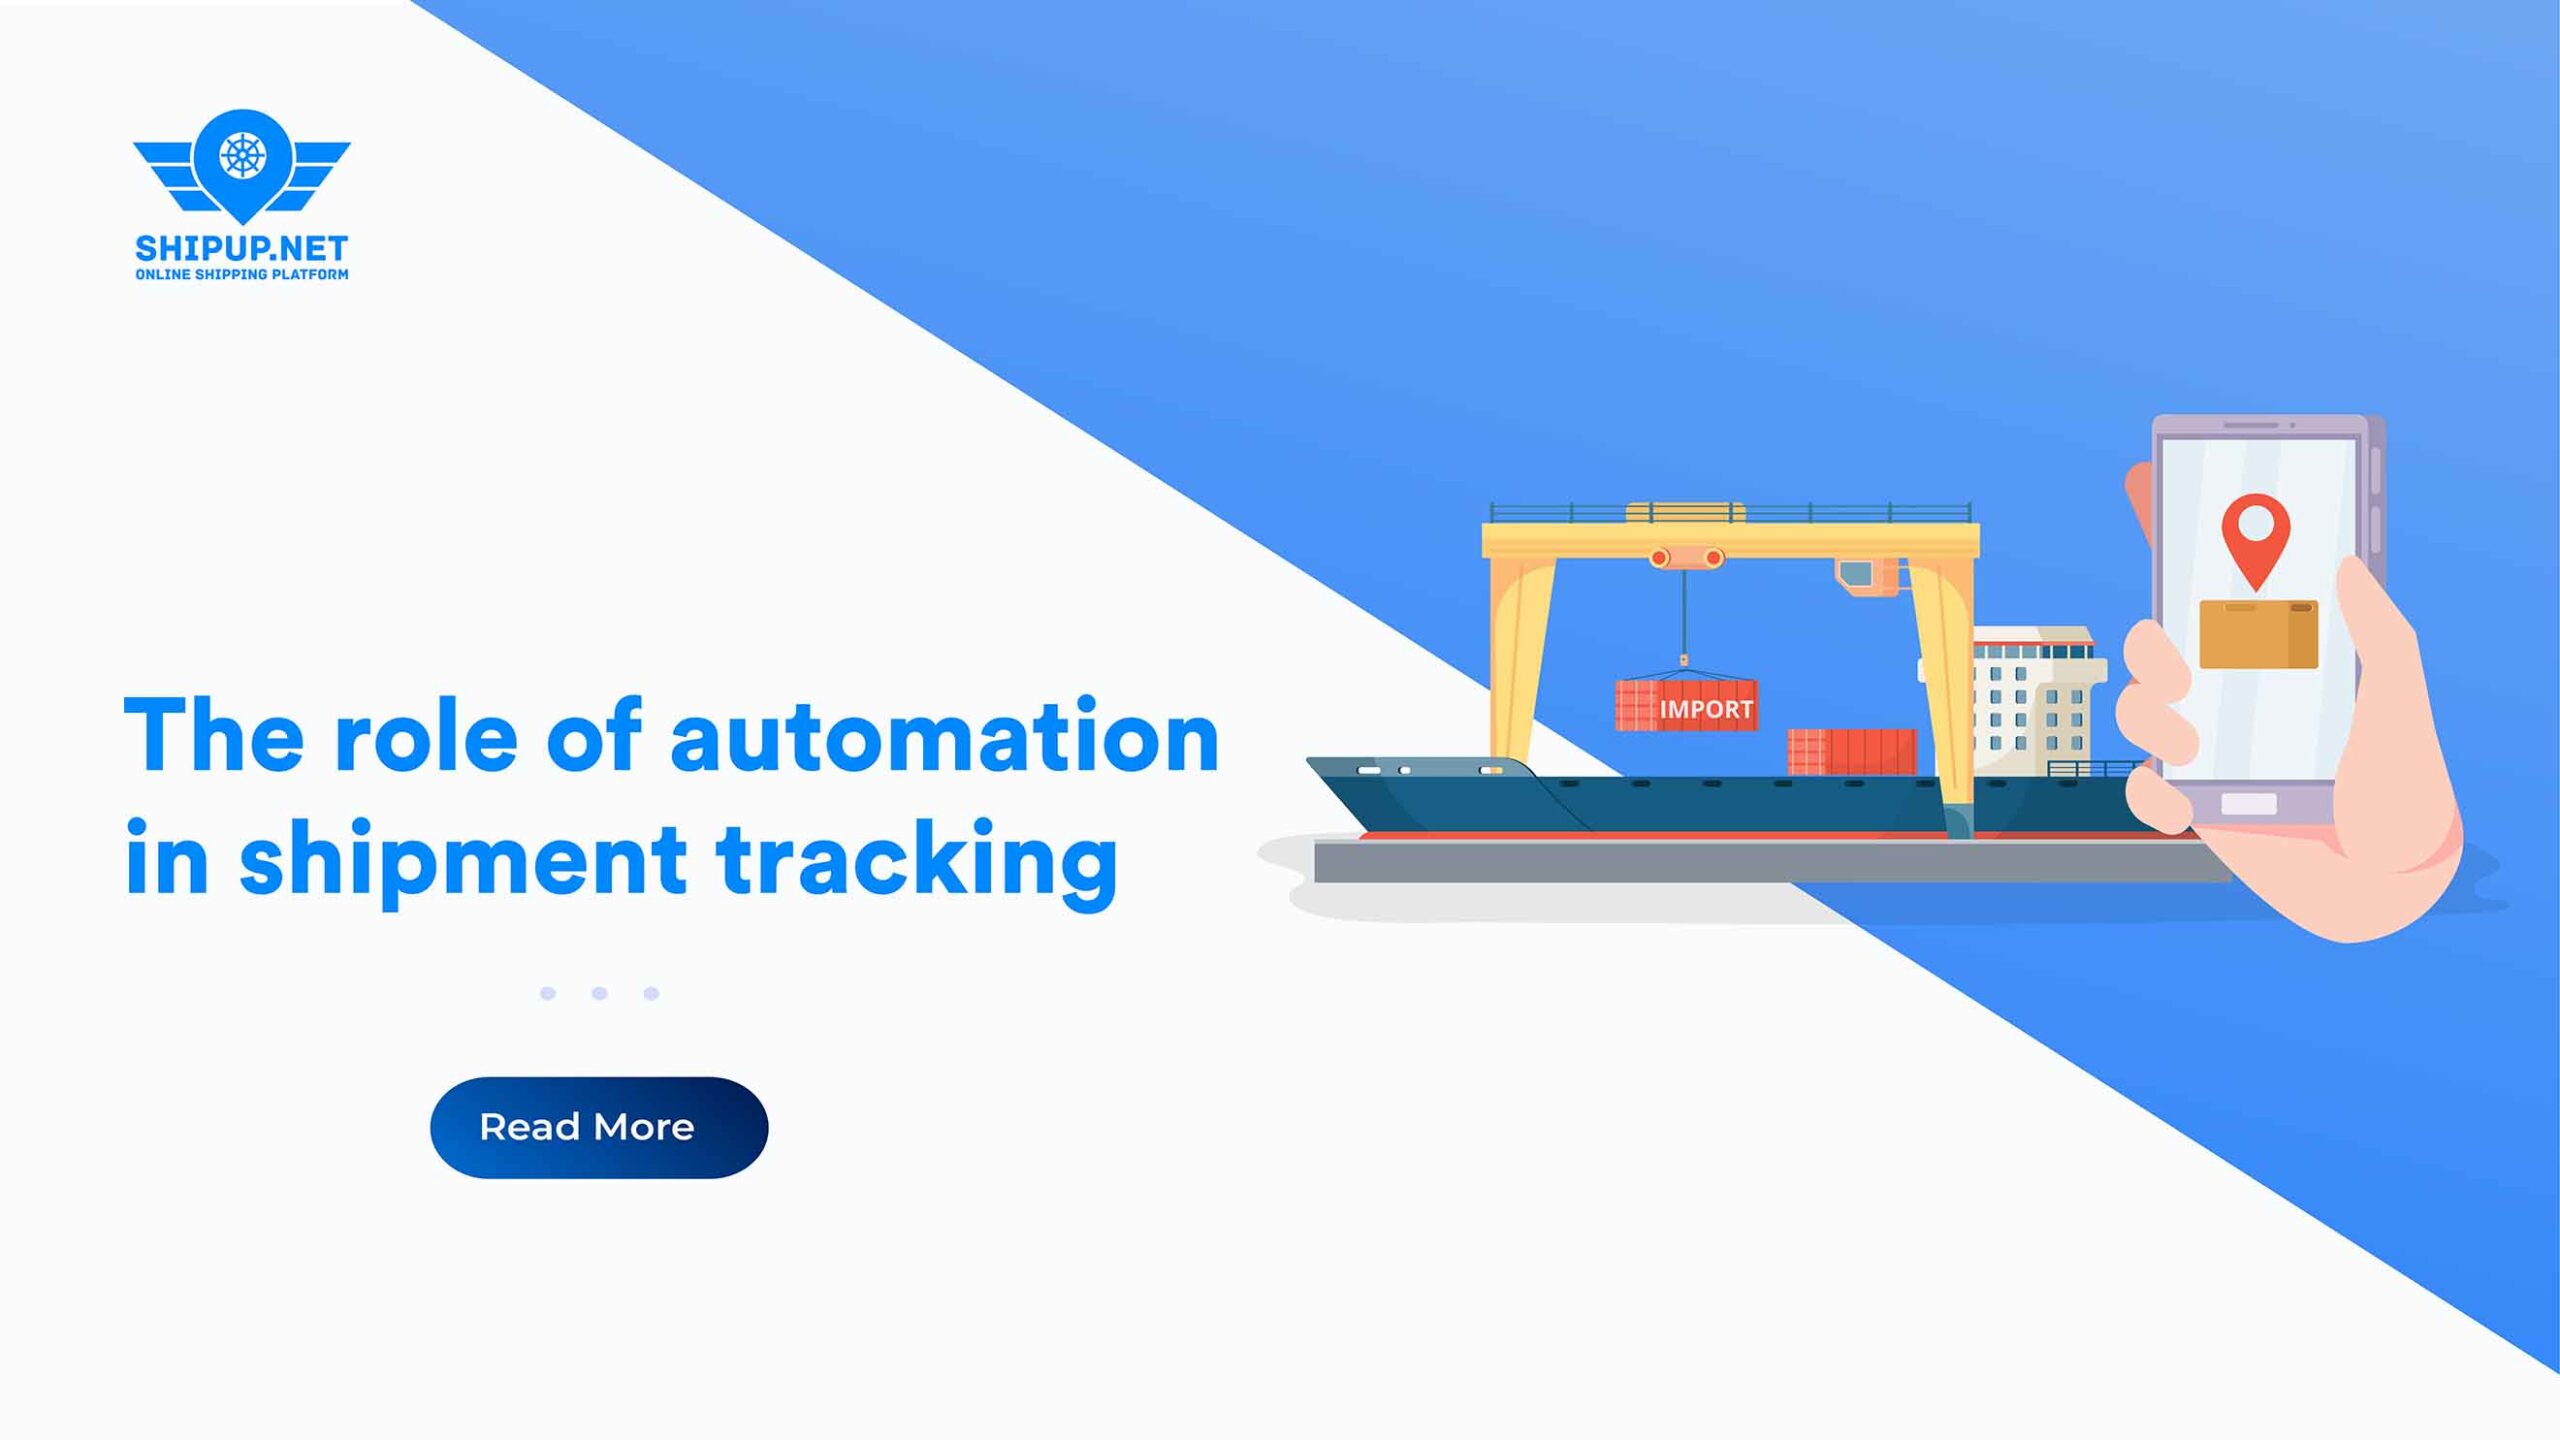 The role of automation in shipment tracking